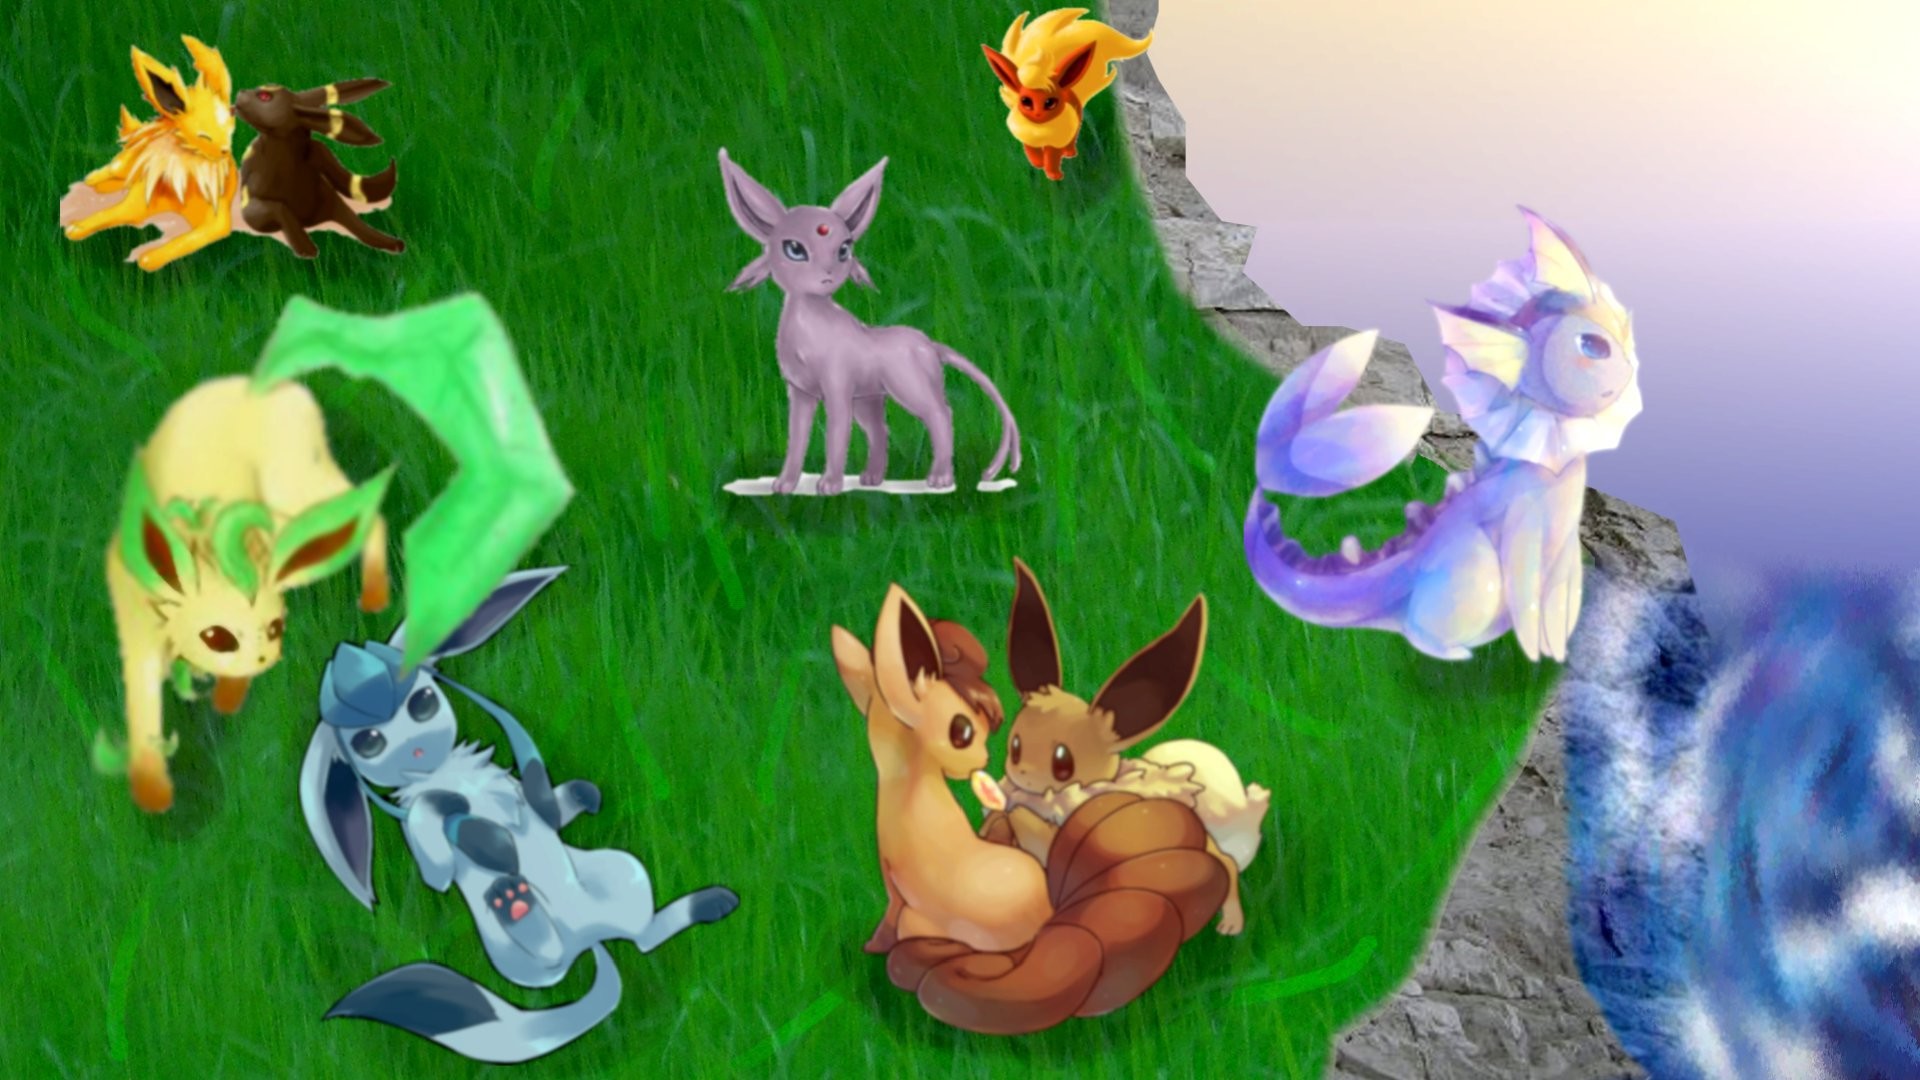 1920x1080 ... Eevee and his evolutions with Vulpix by Valyli